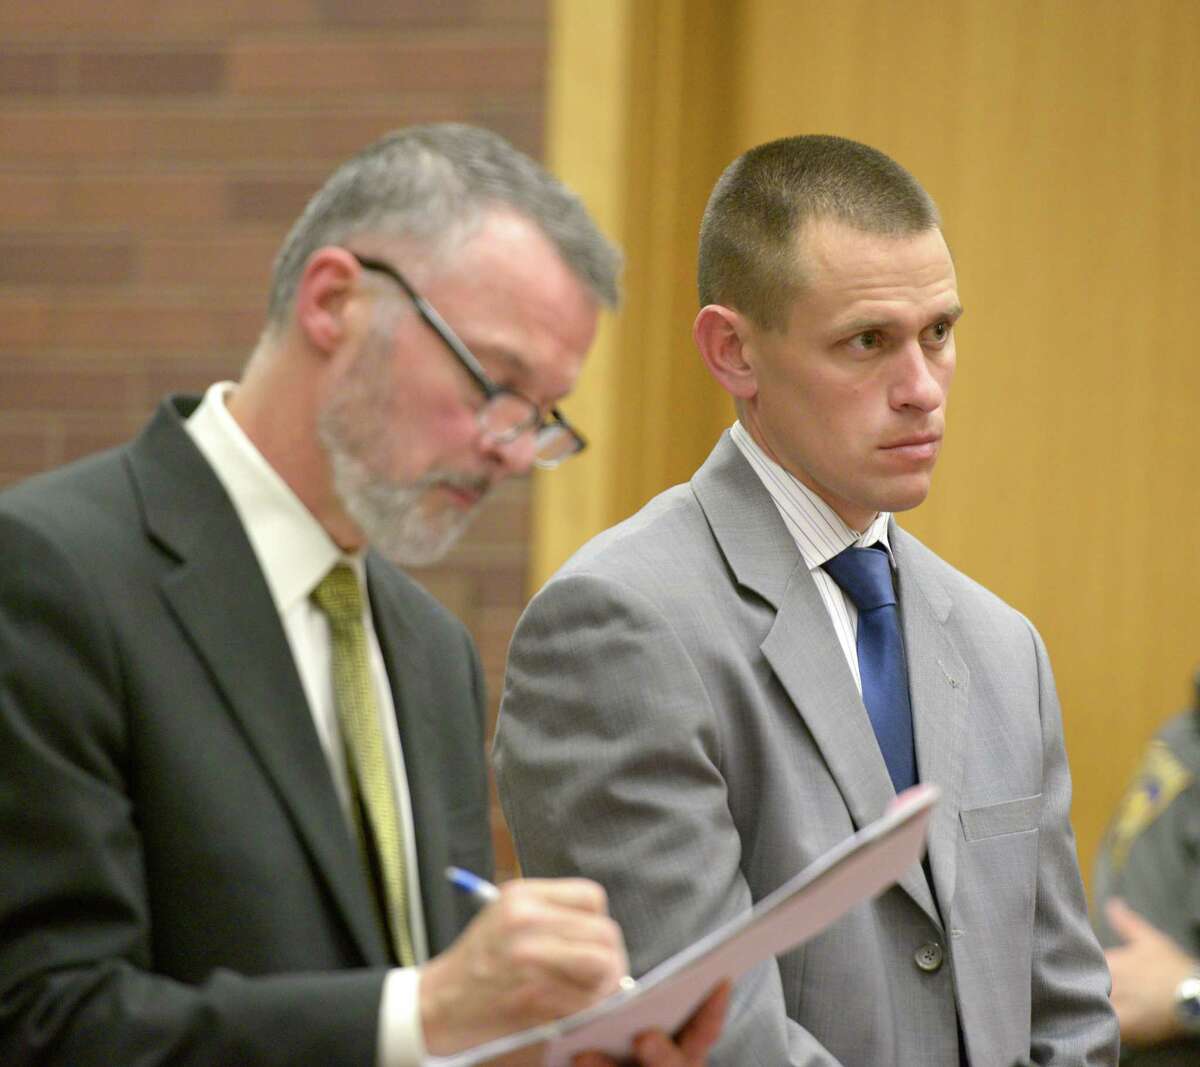 Kyle Seitz, of Ridgefield, right, in Danbury Superior Court with his attorney John Gulash, left, Nov.12, 2014. Seitz will appear in Danbury Superior Court for the start of pretrial hearings in Danbury, Conn. on Tuesday, Dec. 16, 2014